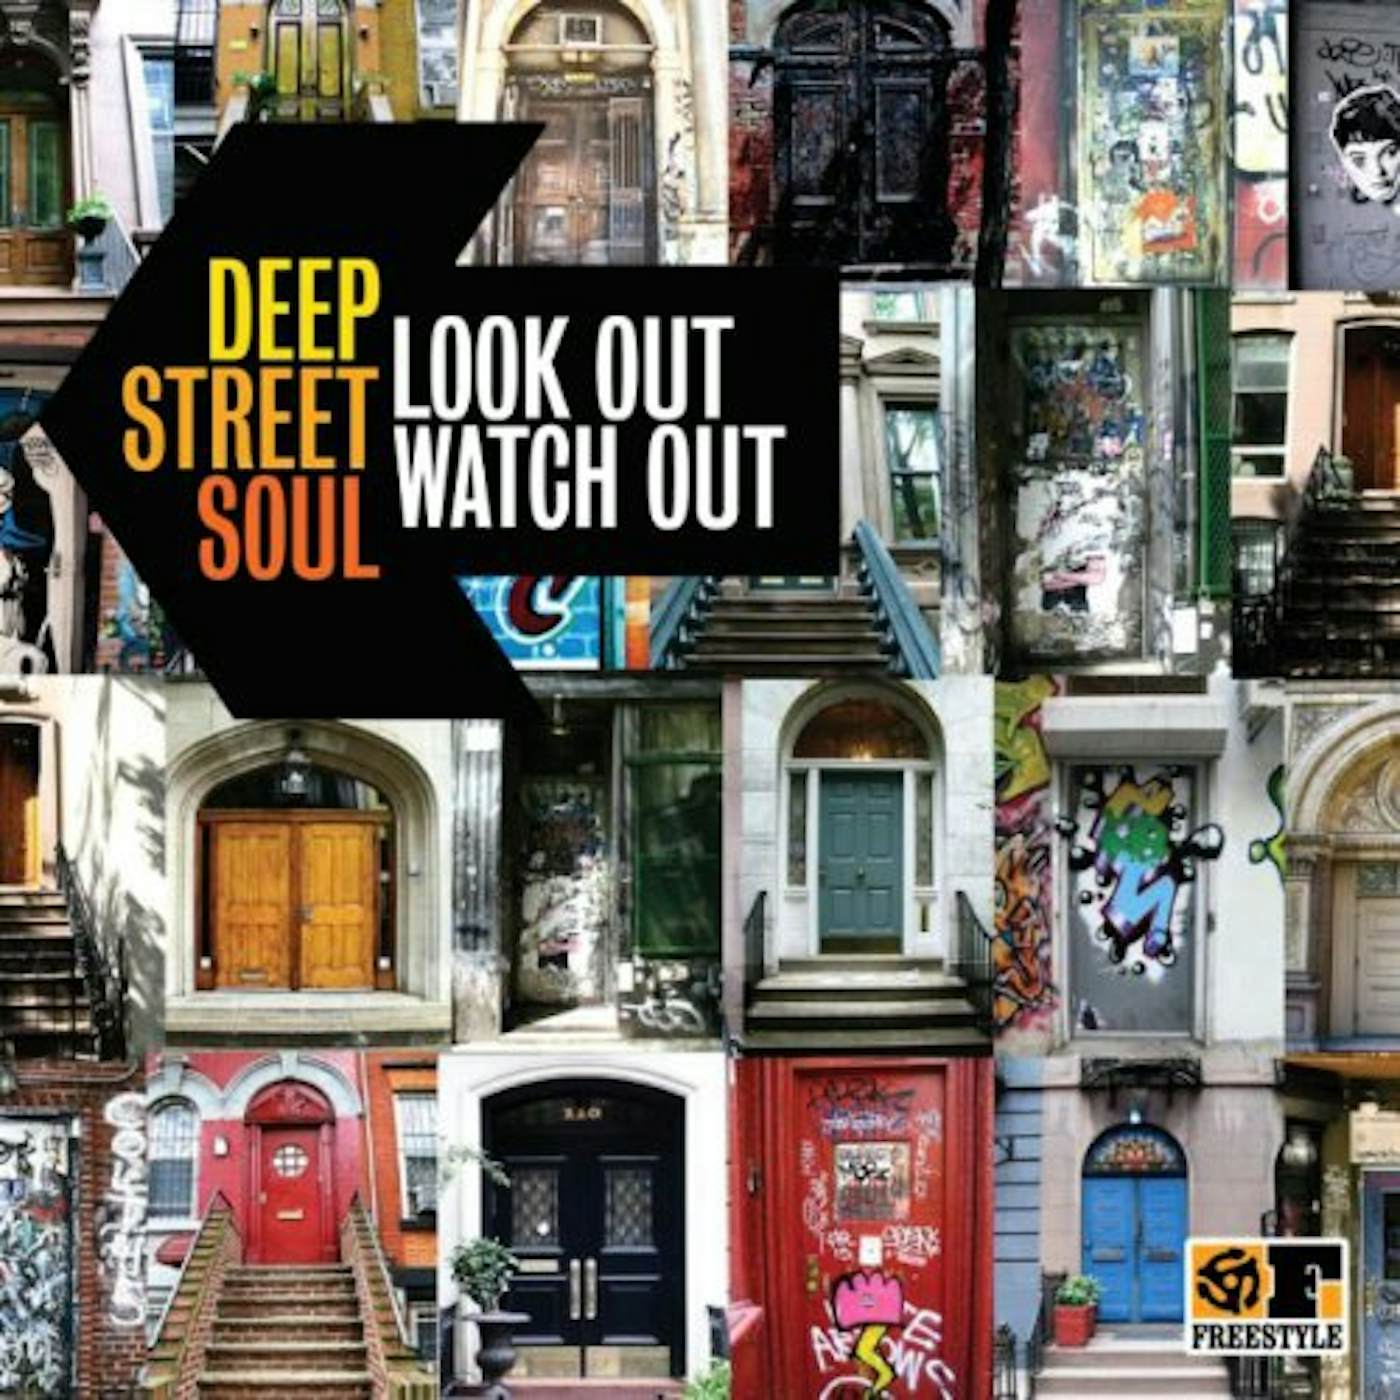 Deep Street Soul Look Out Watch Out Vinyl Record